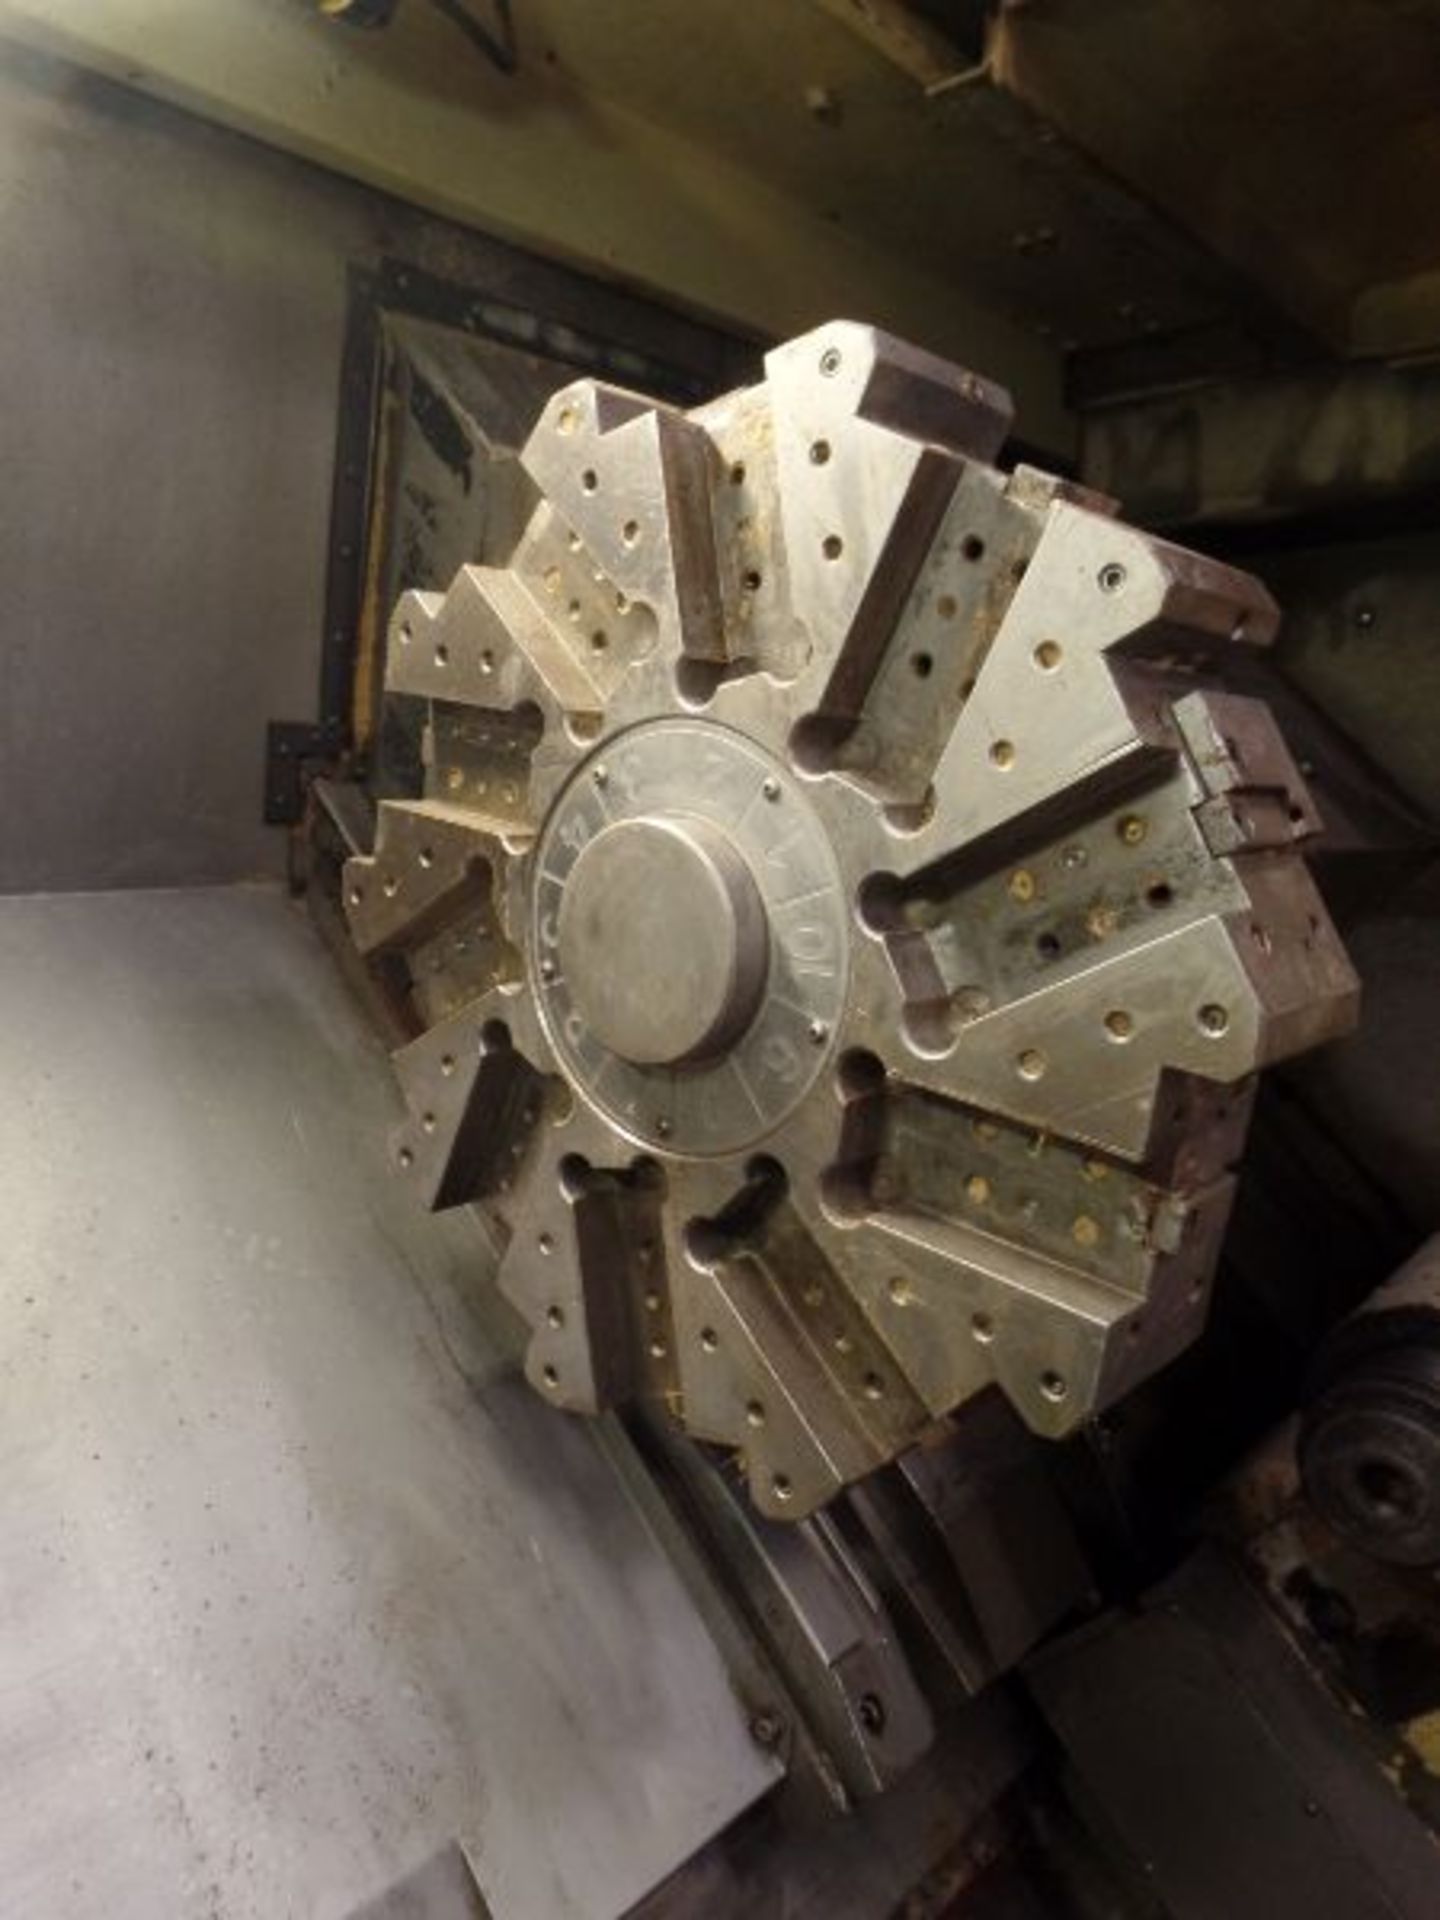 Fortune Vturn-36, Fanuc 0i-T, 25.6” SW, 21.7” Max. Turn Dia. x 51” Centers, 4.1” Spindle Bore, - Image 7 of 10